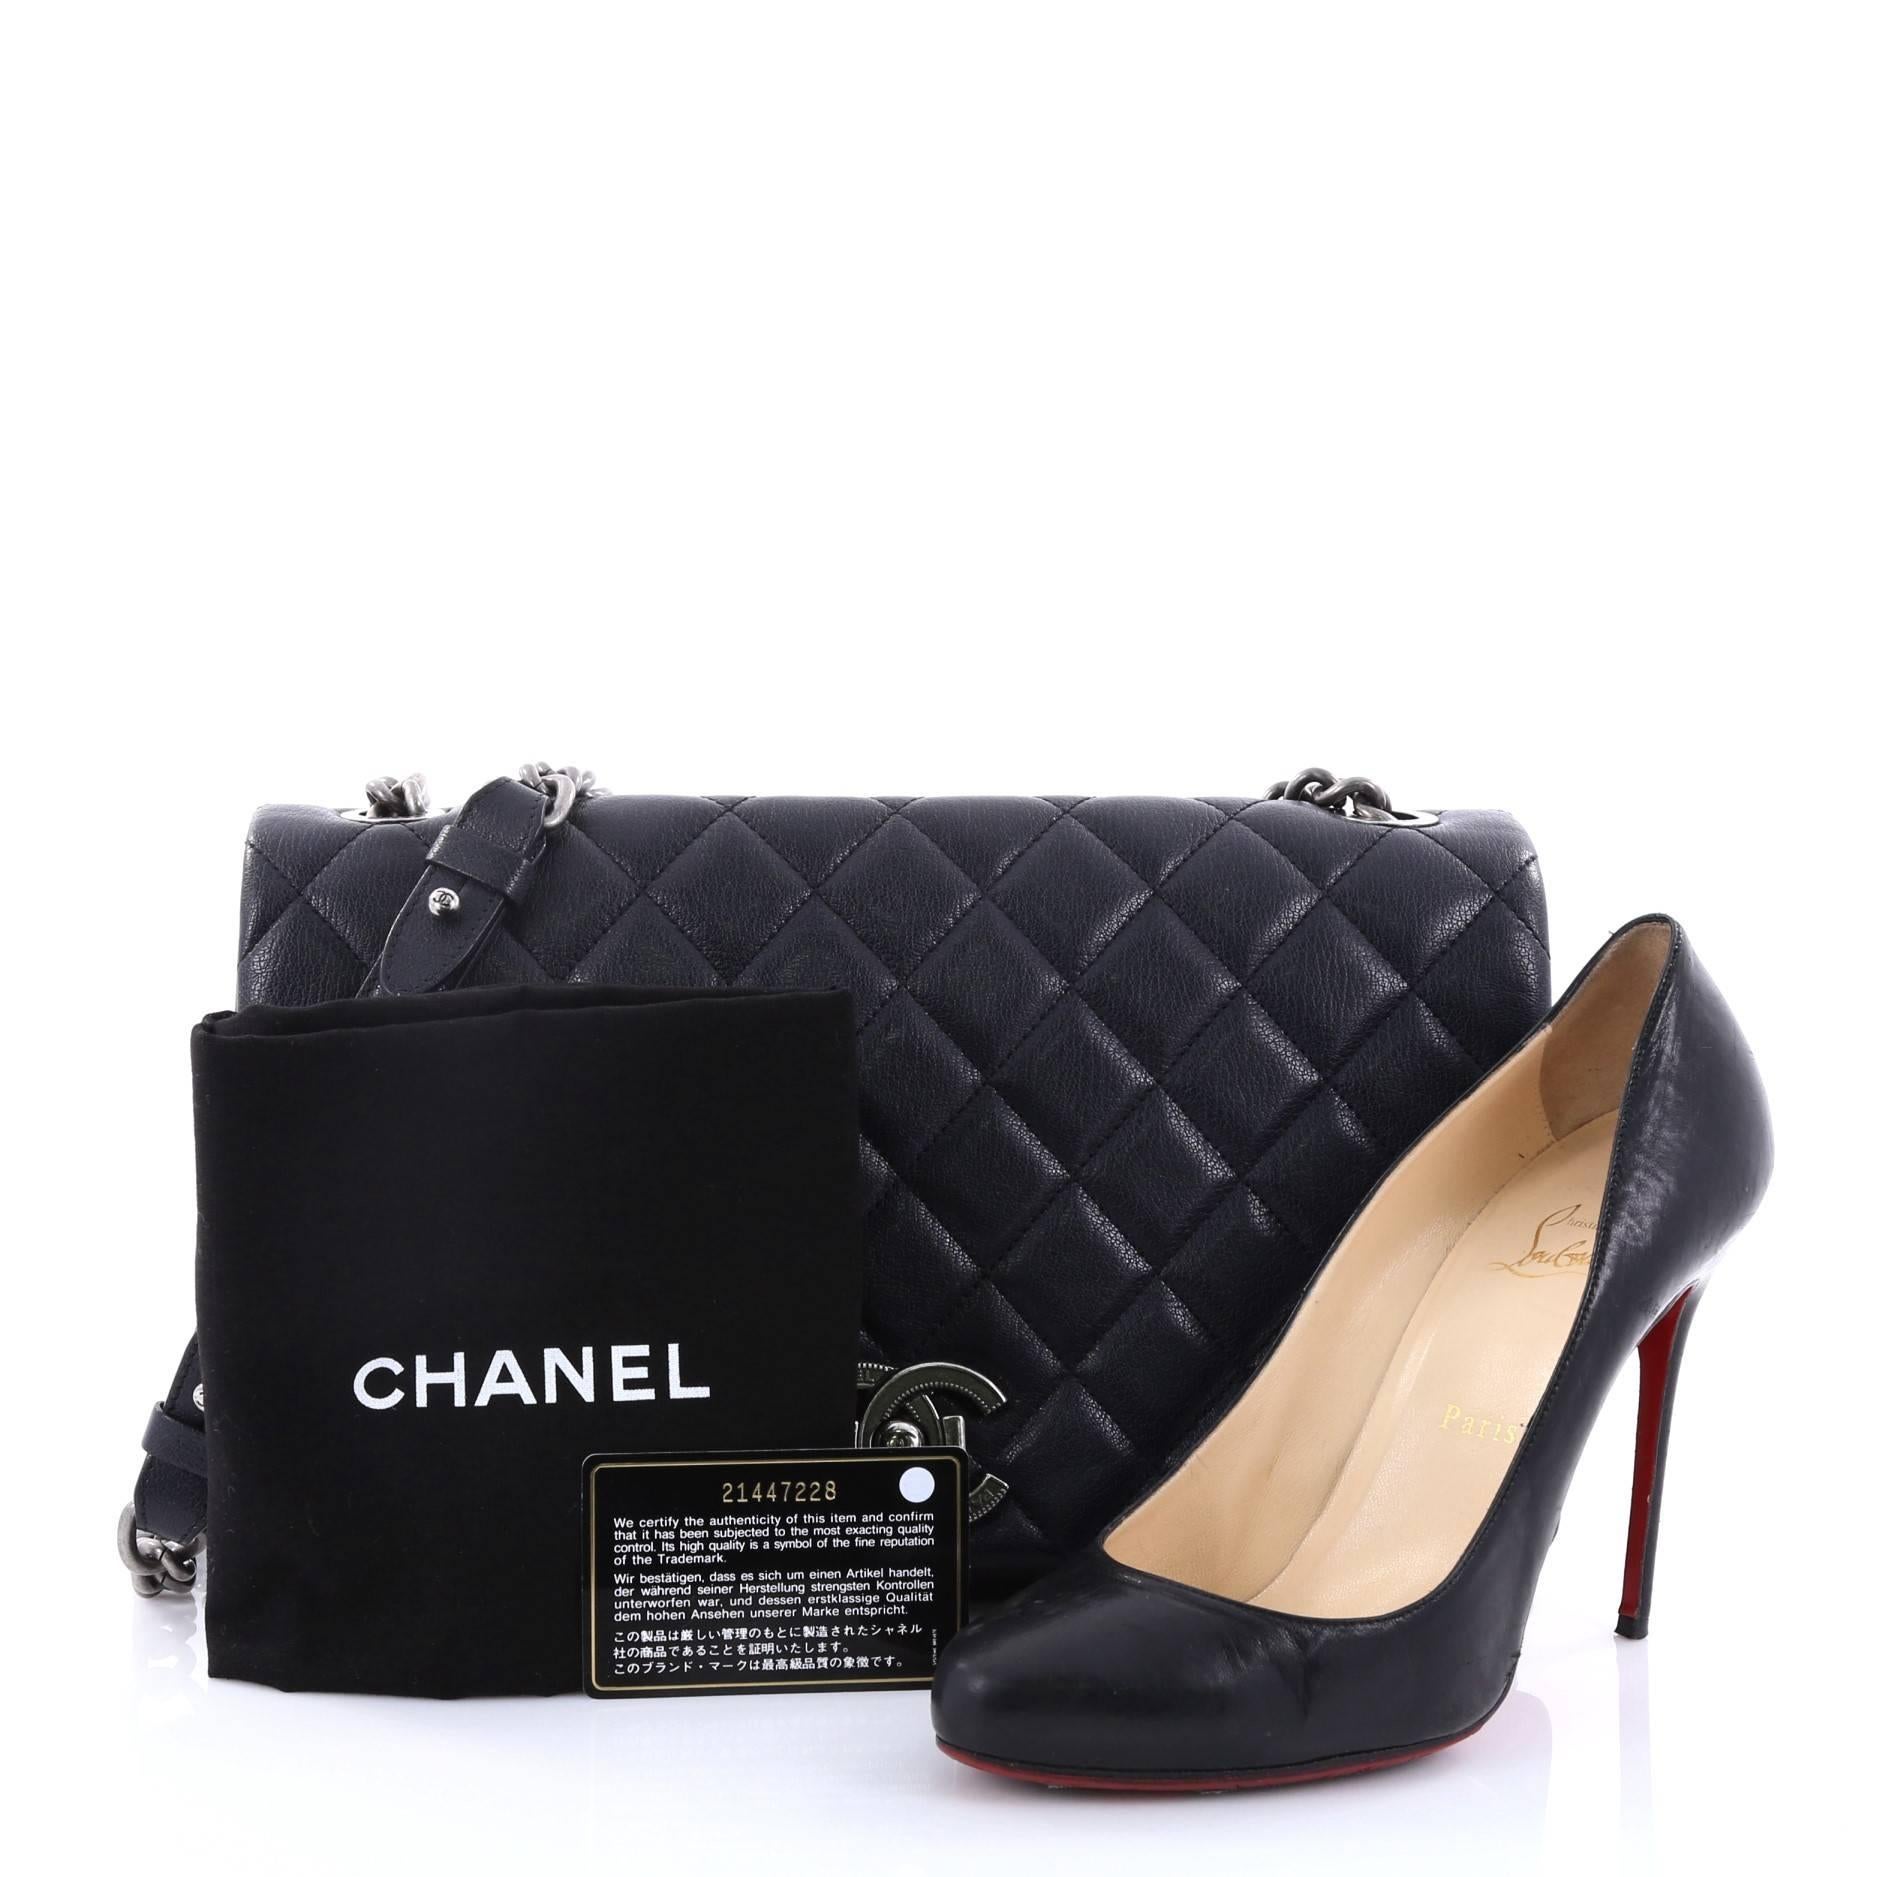 This authentic Chanel City Rock Flap Bag Quilted Goatskin Large is anything but ordinary. Crafted from navy quilted goatskin, this sophisticated bag features a gunmetal chain link shoulder strap with leather pad, exterior flat back pocket, CC push